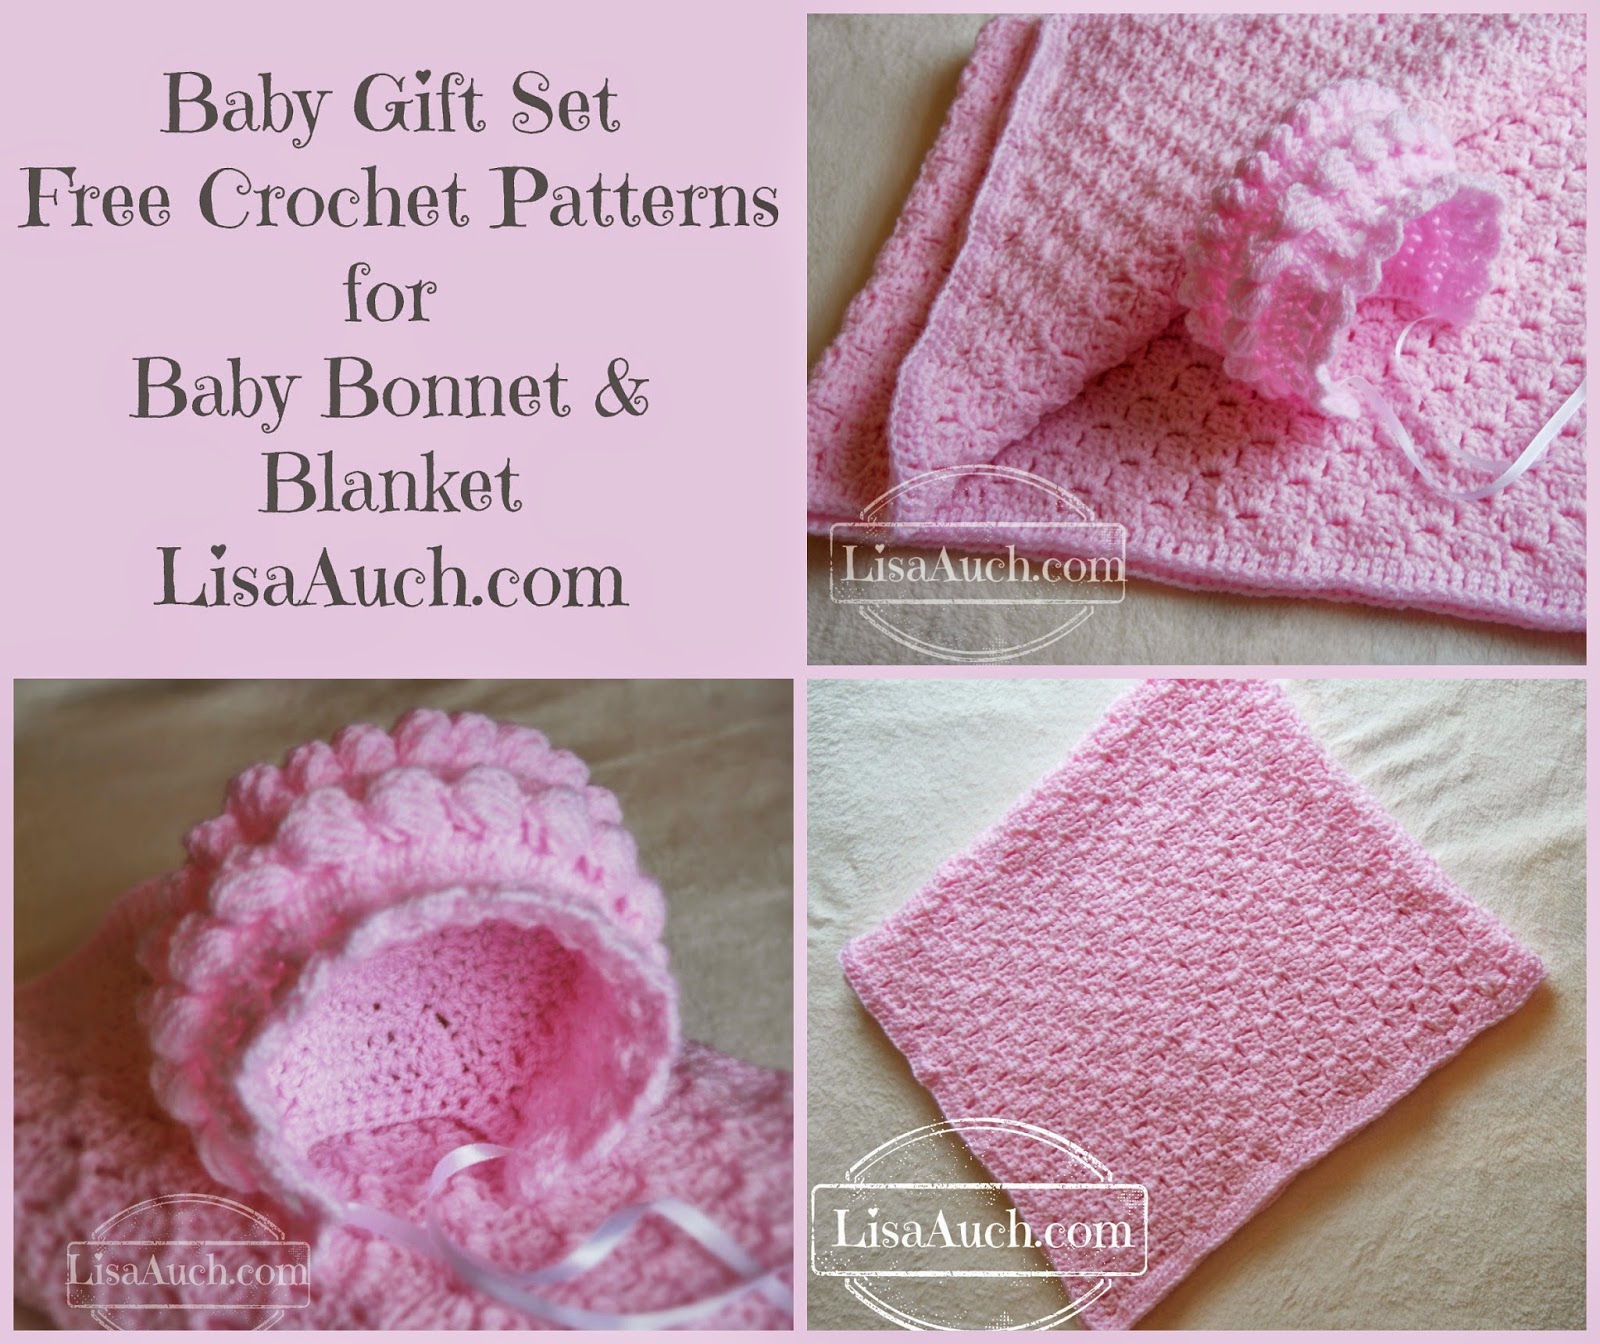 Baby bonnet and Baby Blanket Crochet Patterns Free Baby Crochet 